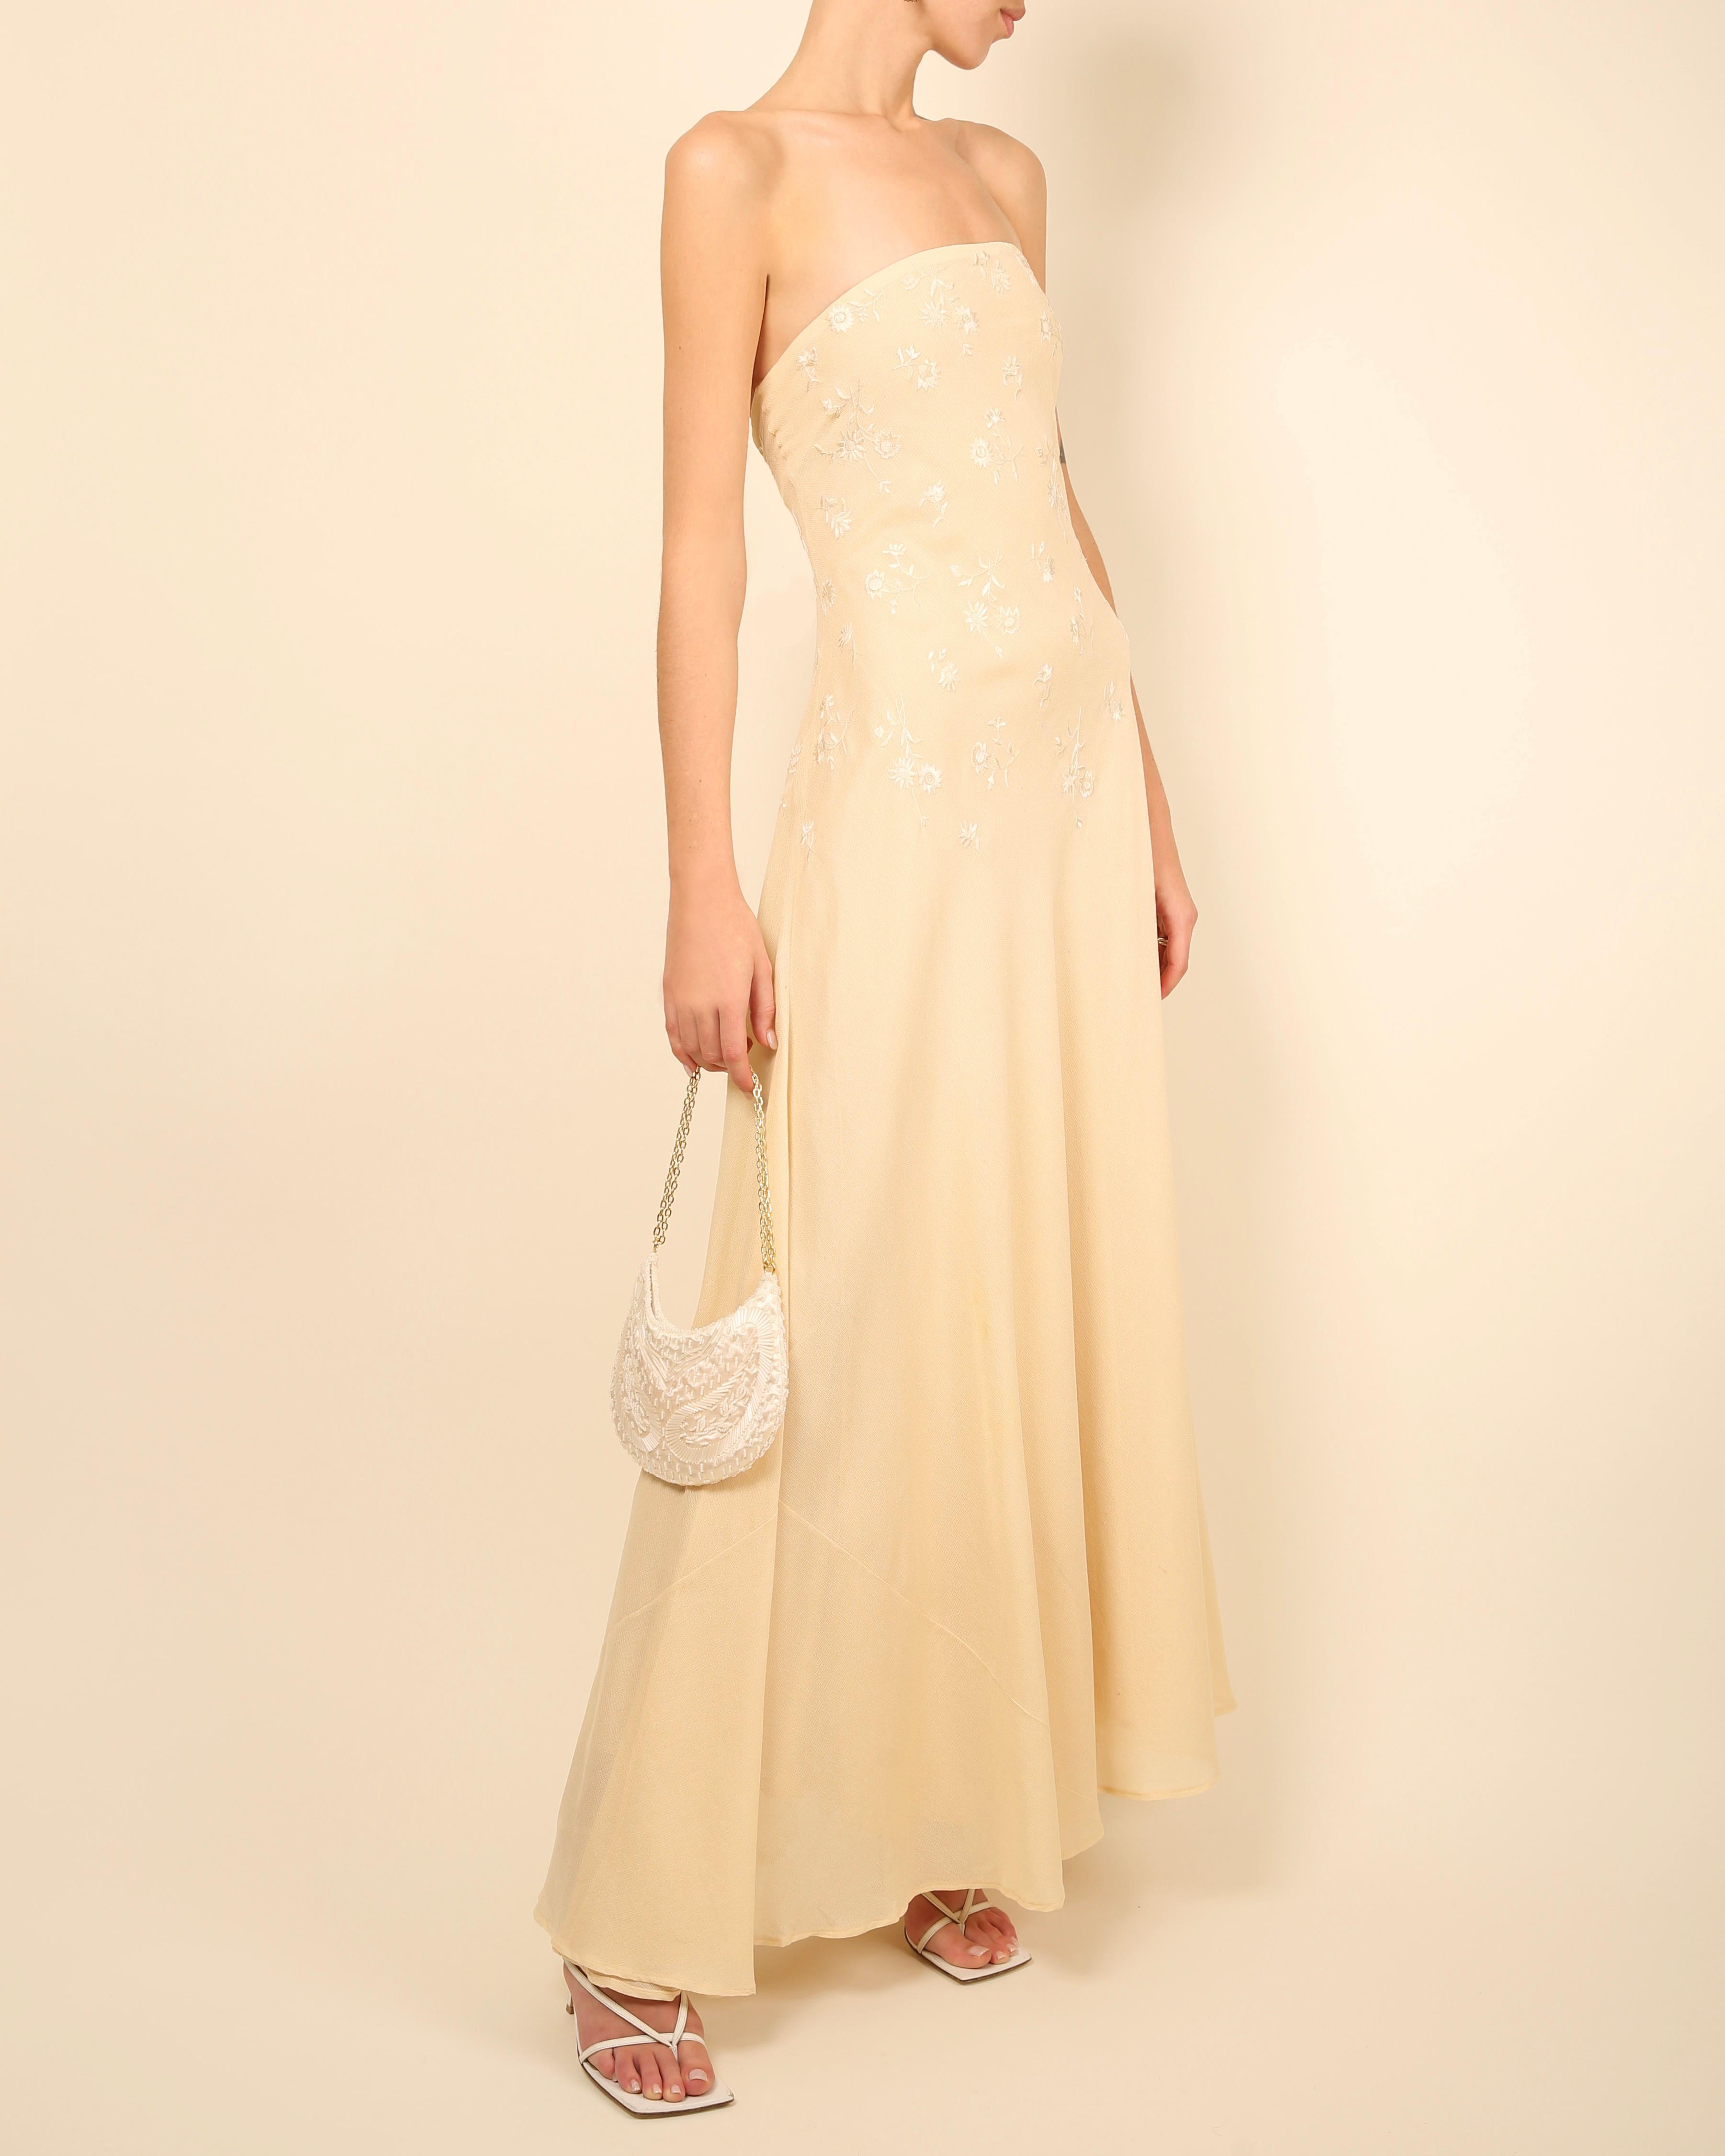 Yellow Ralph Lauren Collection cream yellow strapless floral embroidered dress gown